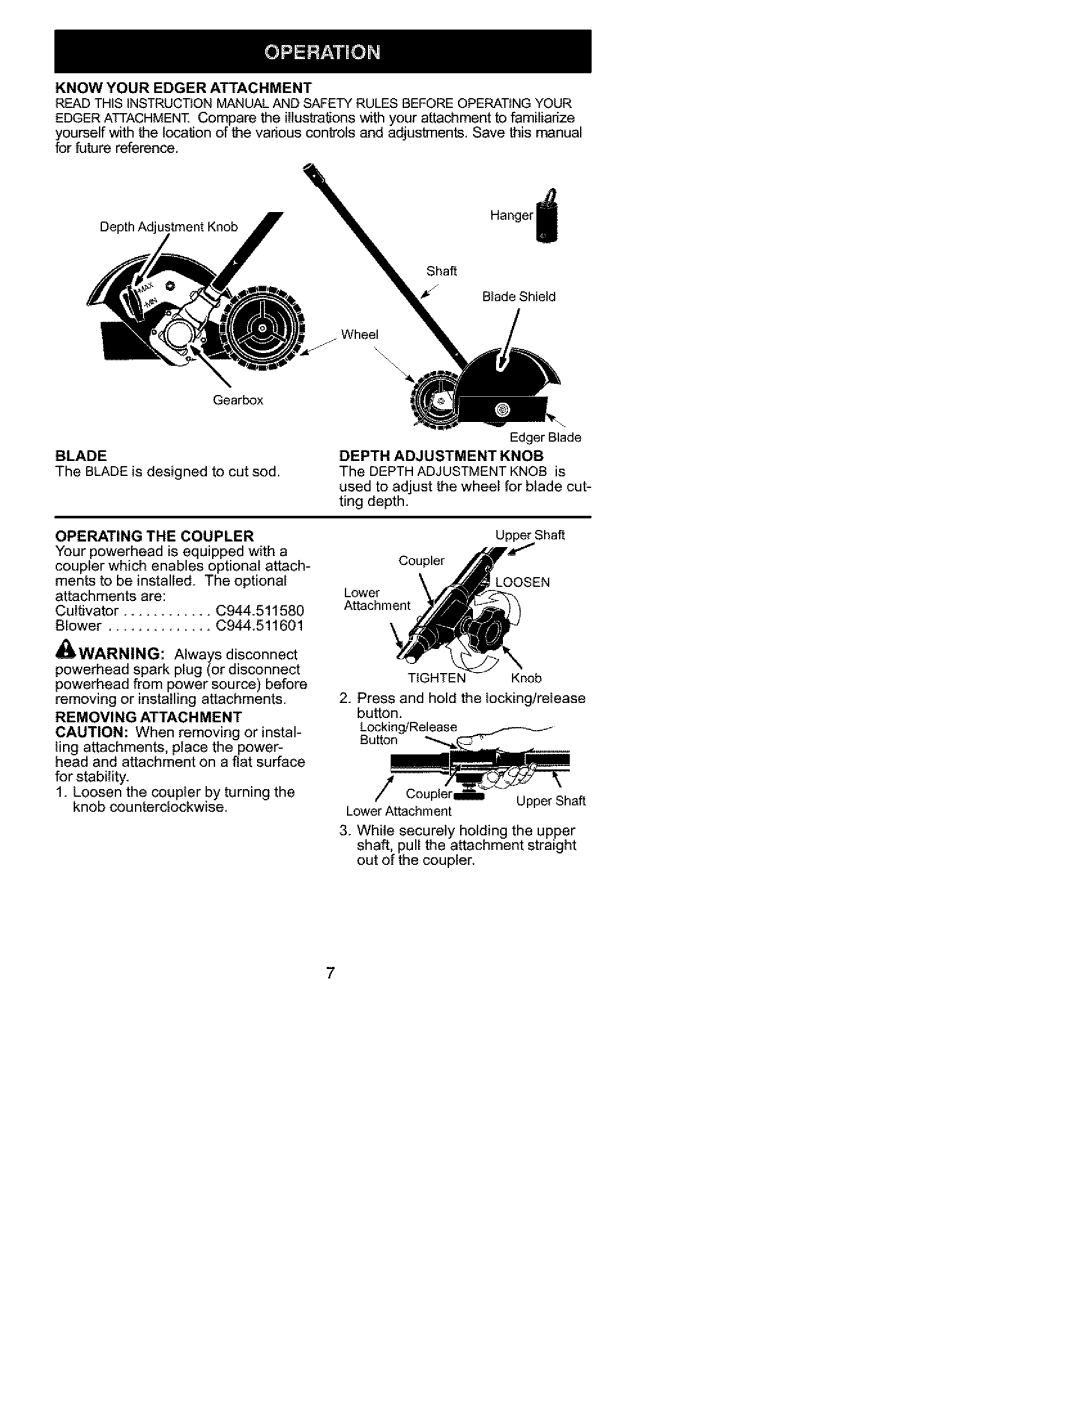 Craftsman C944.511572 instruction manual Know Your Edger Attachment, Blade, Removing Attachment 